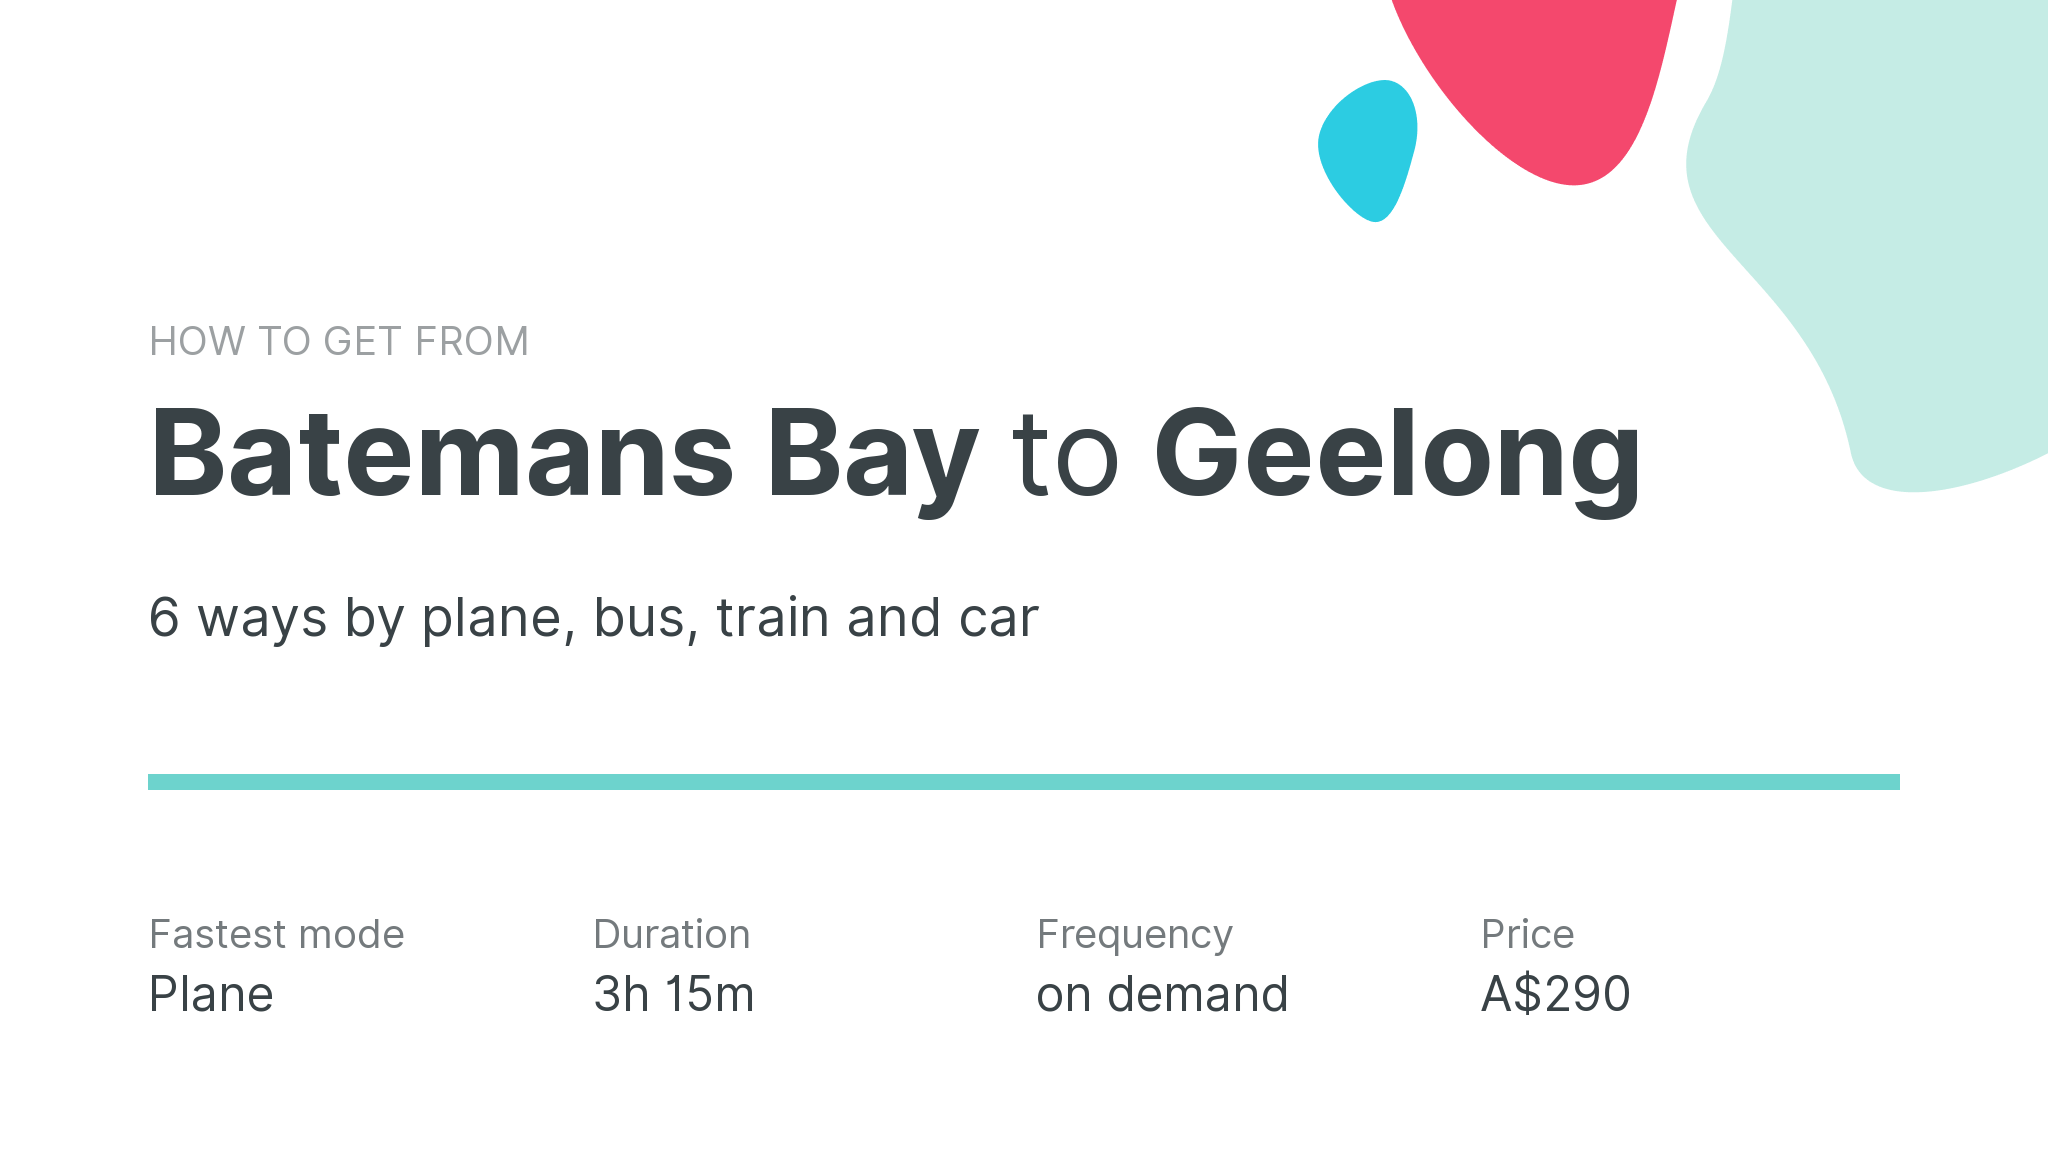 How do I get from Batemans Bay to Geelong